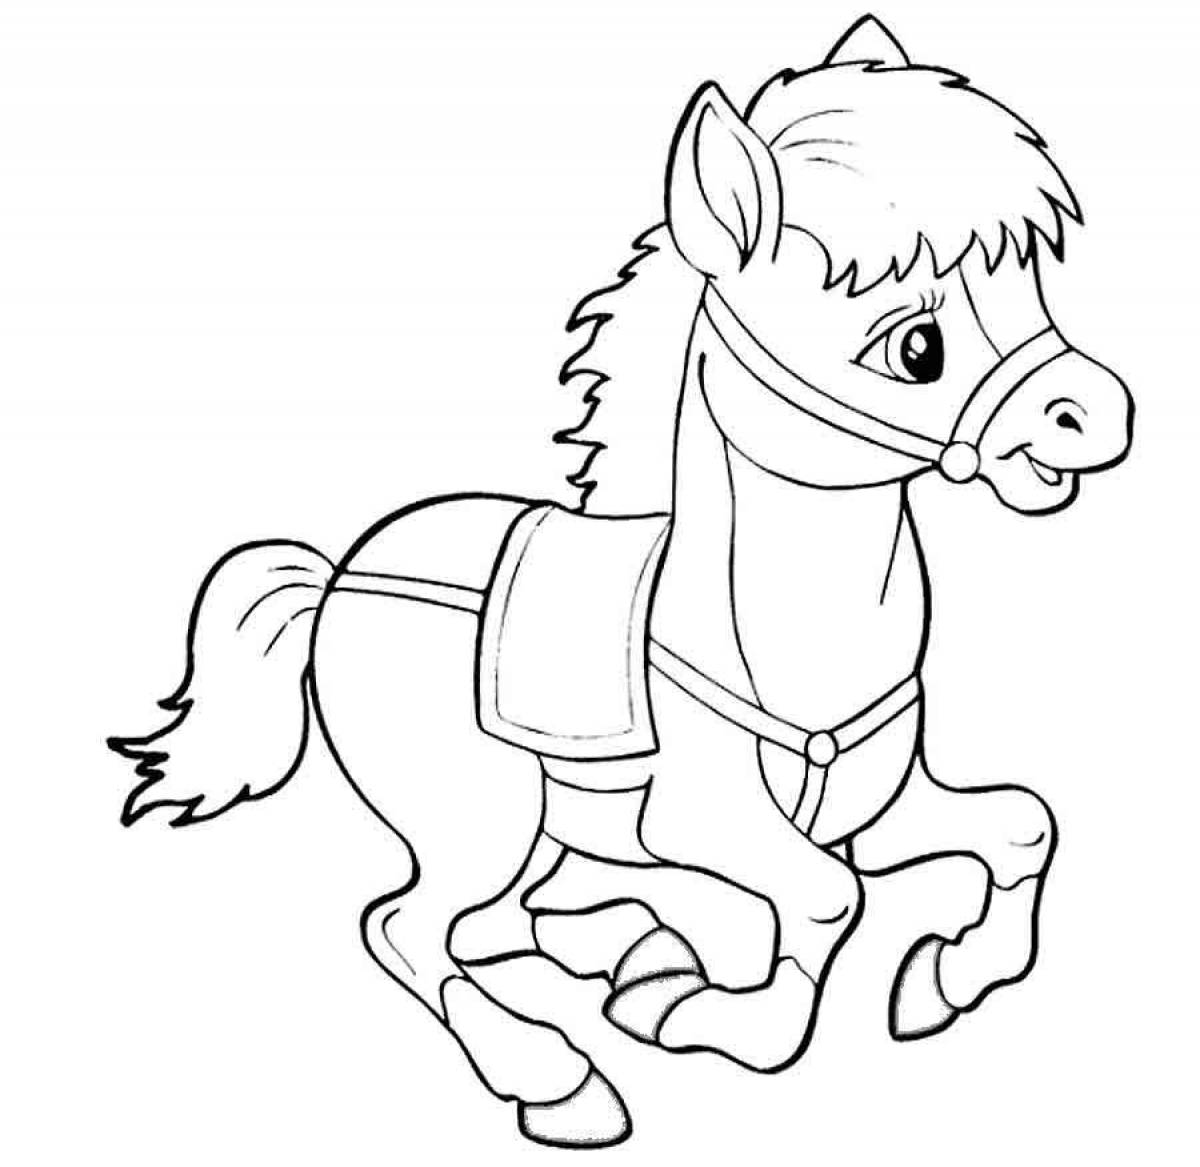 Majestic roan horse coloring page